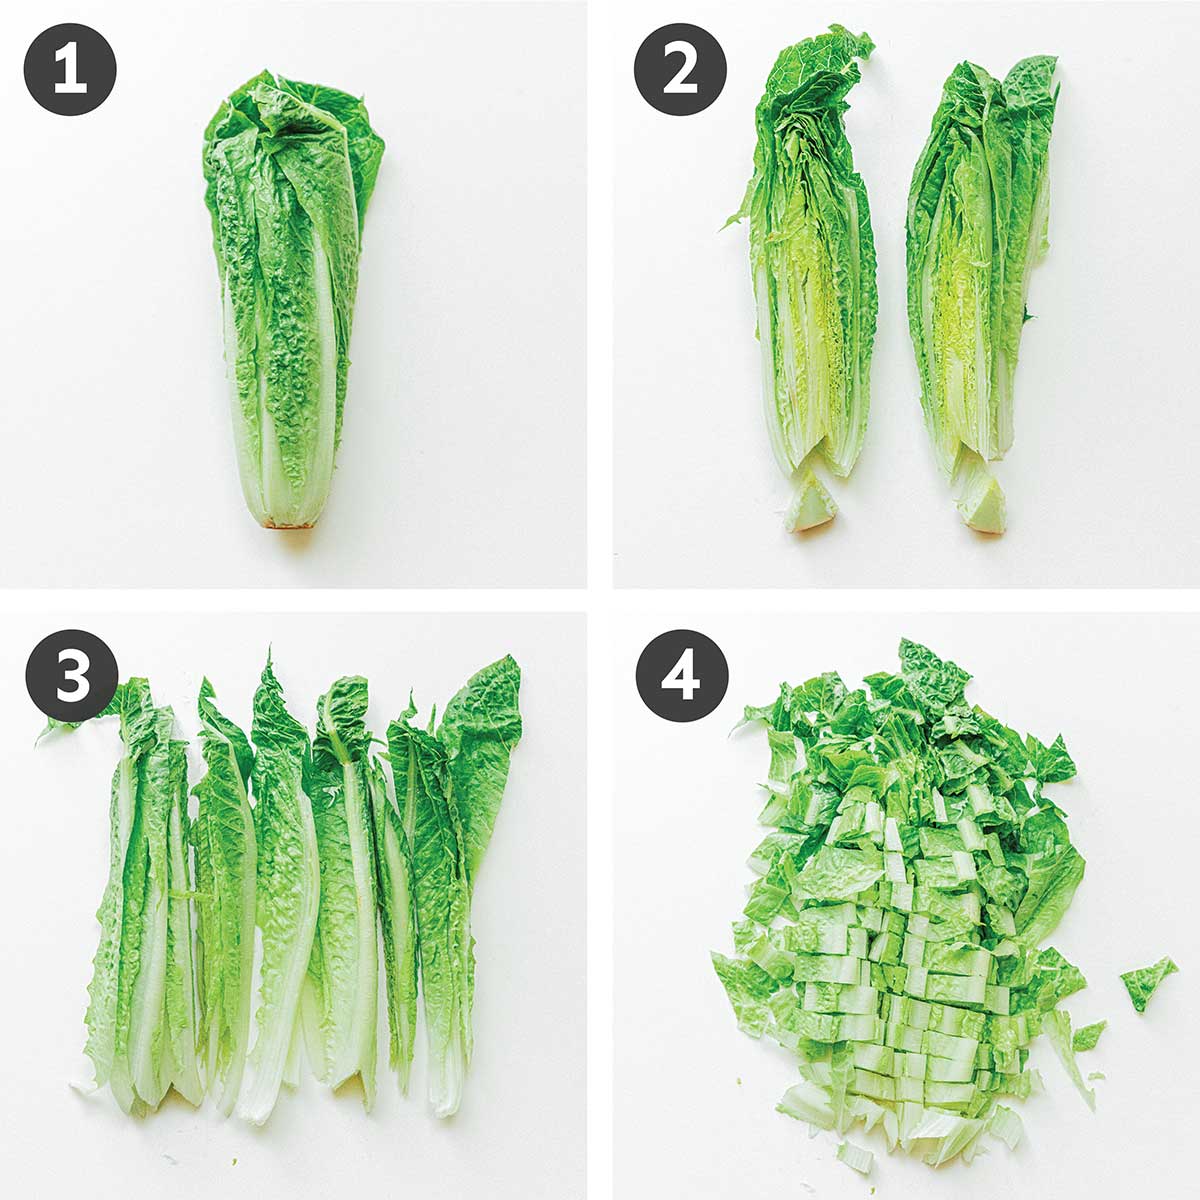 A 4-step image depicting how to cut romaine lettuce: cut down the center, remove the stems, and slice